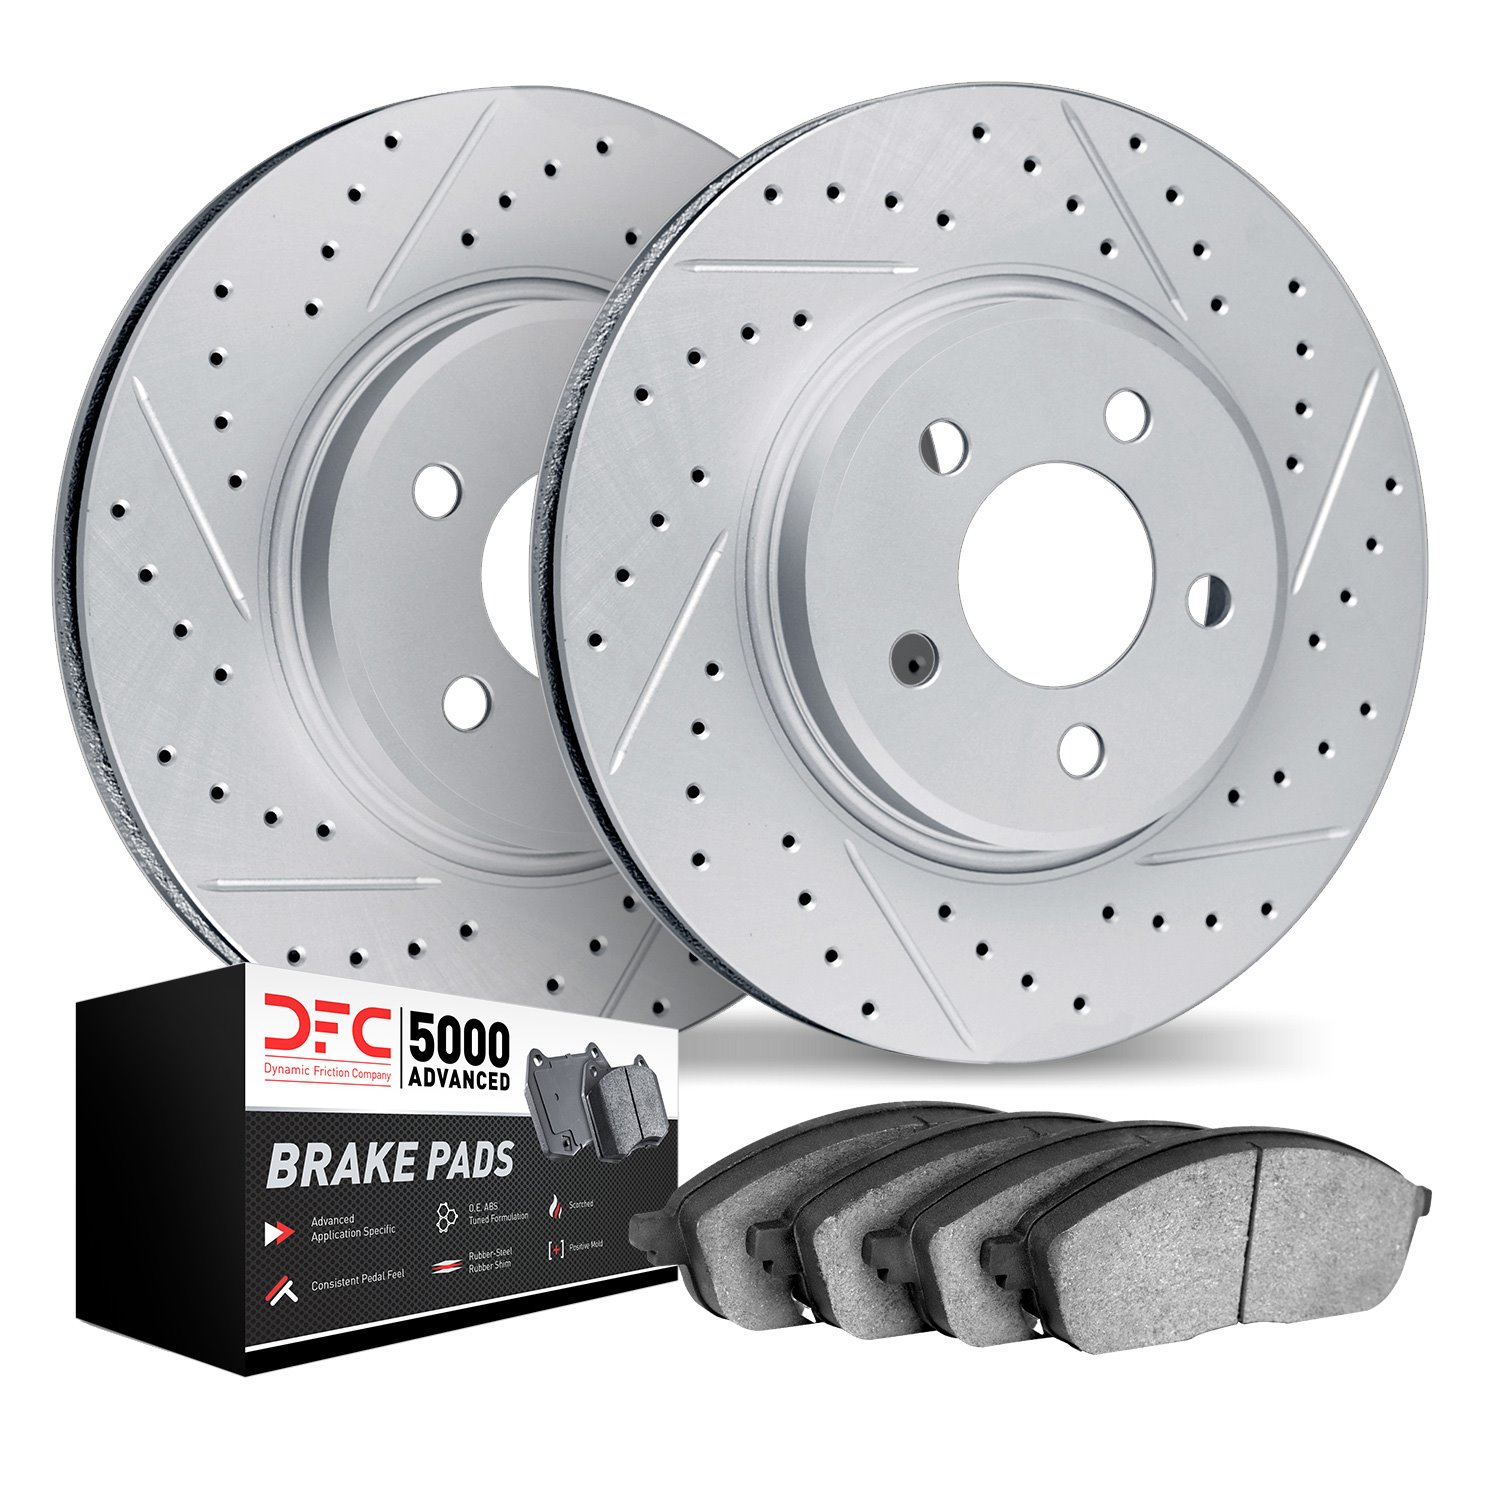 2502-63076 Geoperformance Drilled/Slotted Rotors w/5000 Advanced Brake Pads Kit, Fits Select Mercedes-Benz, Position: Rear